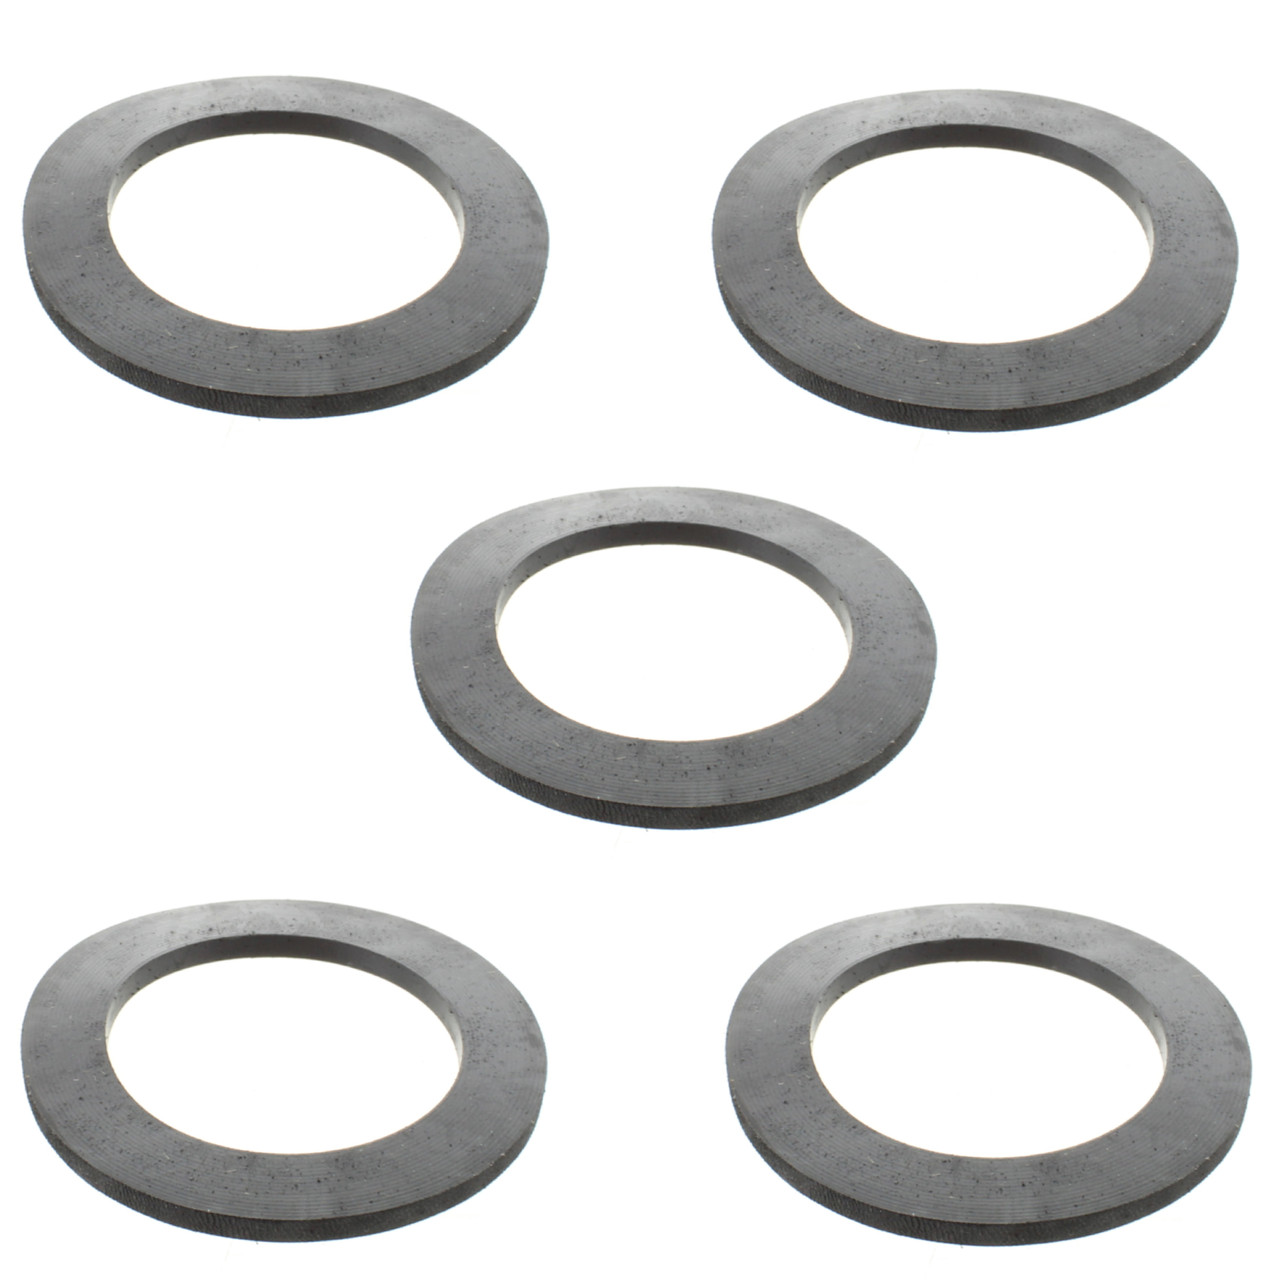 Mercury Marine Mercruiser New OEM Rubber Oil Injection Components Gasket Set of 5 42999 42999T